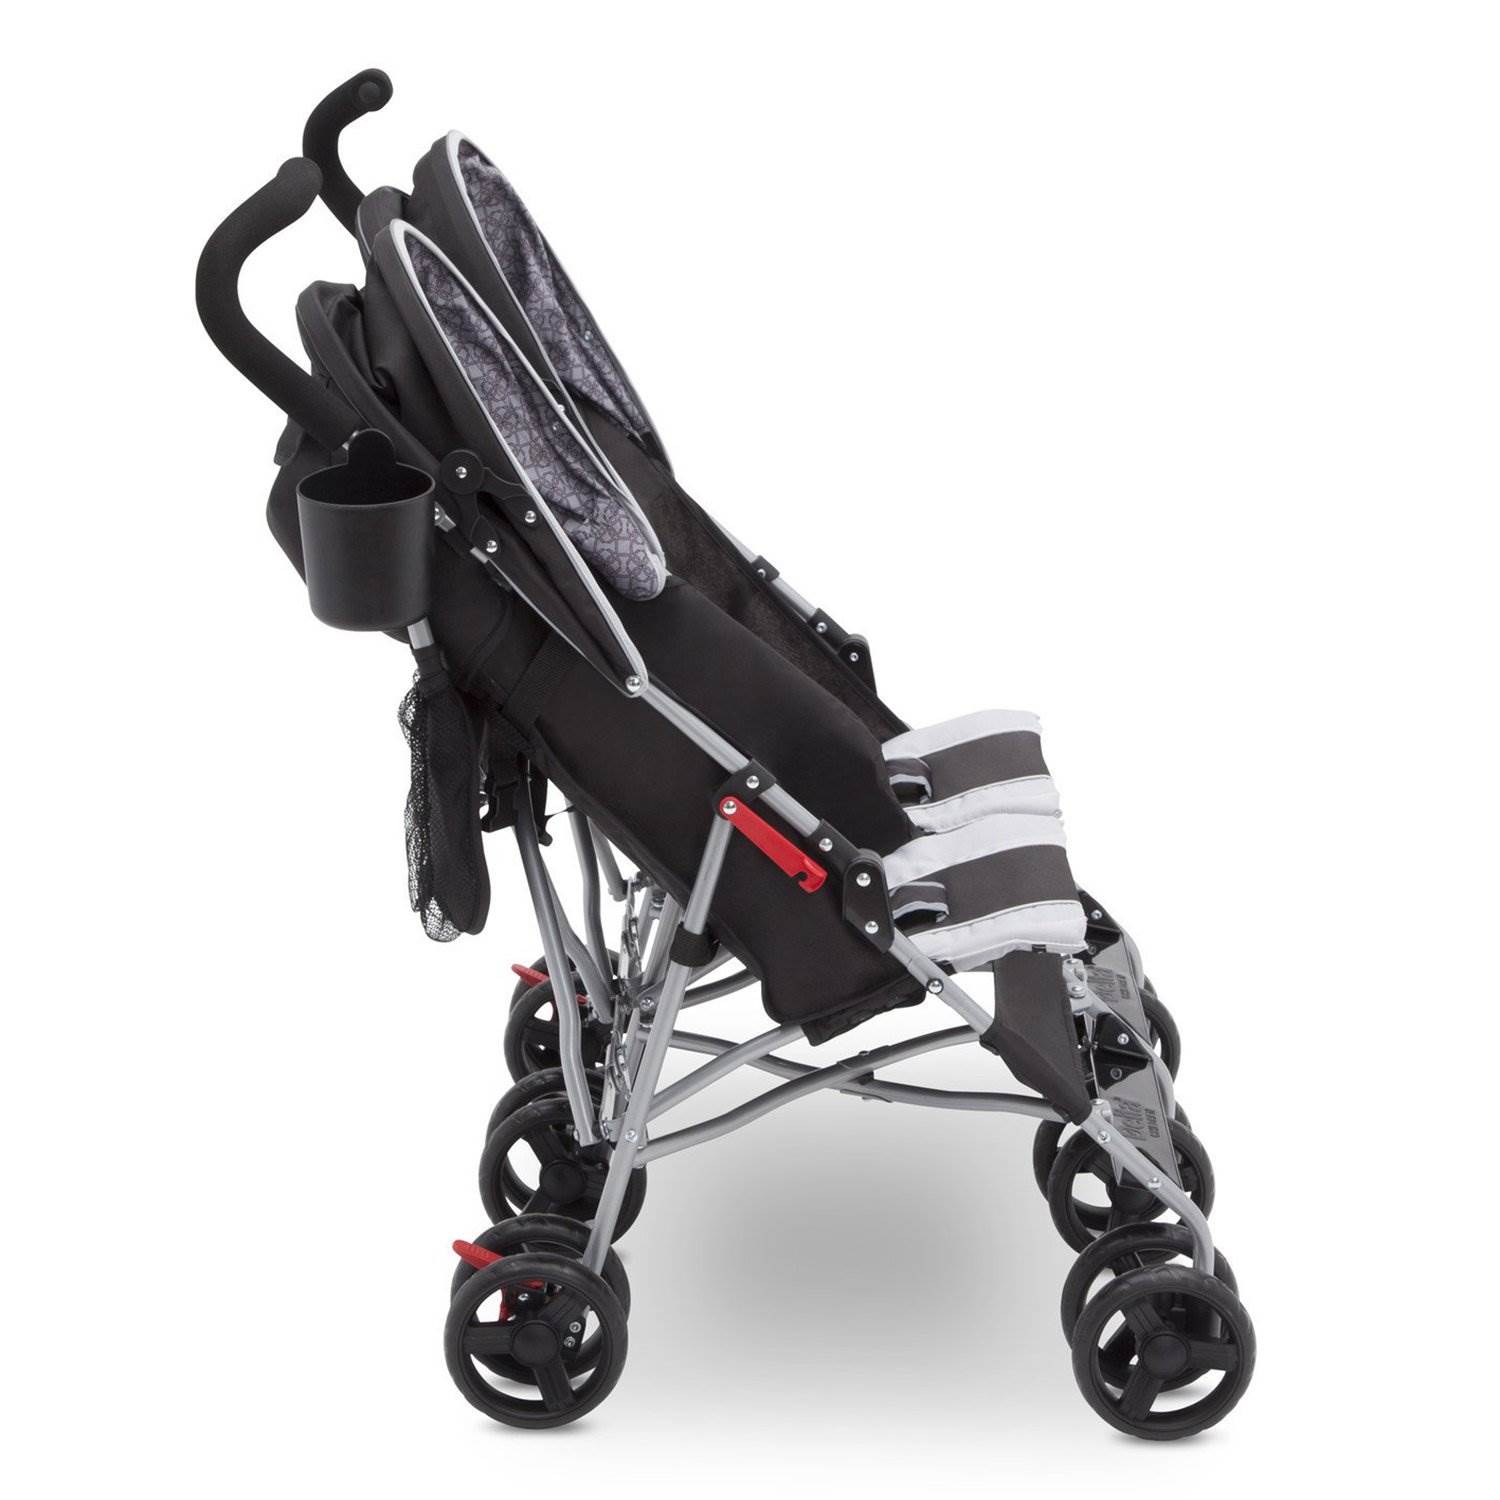 Delta Children LX 35 Pound Side by Side Double Convenience Stroller, Red & Gray - image 4 of 7